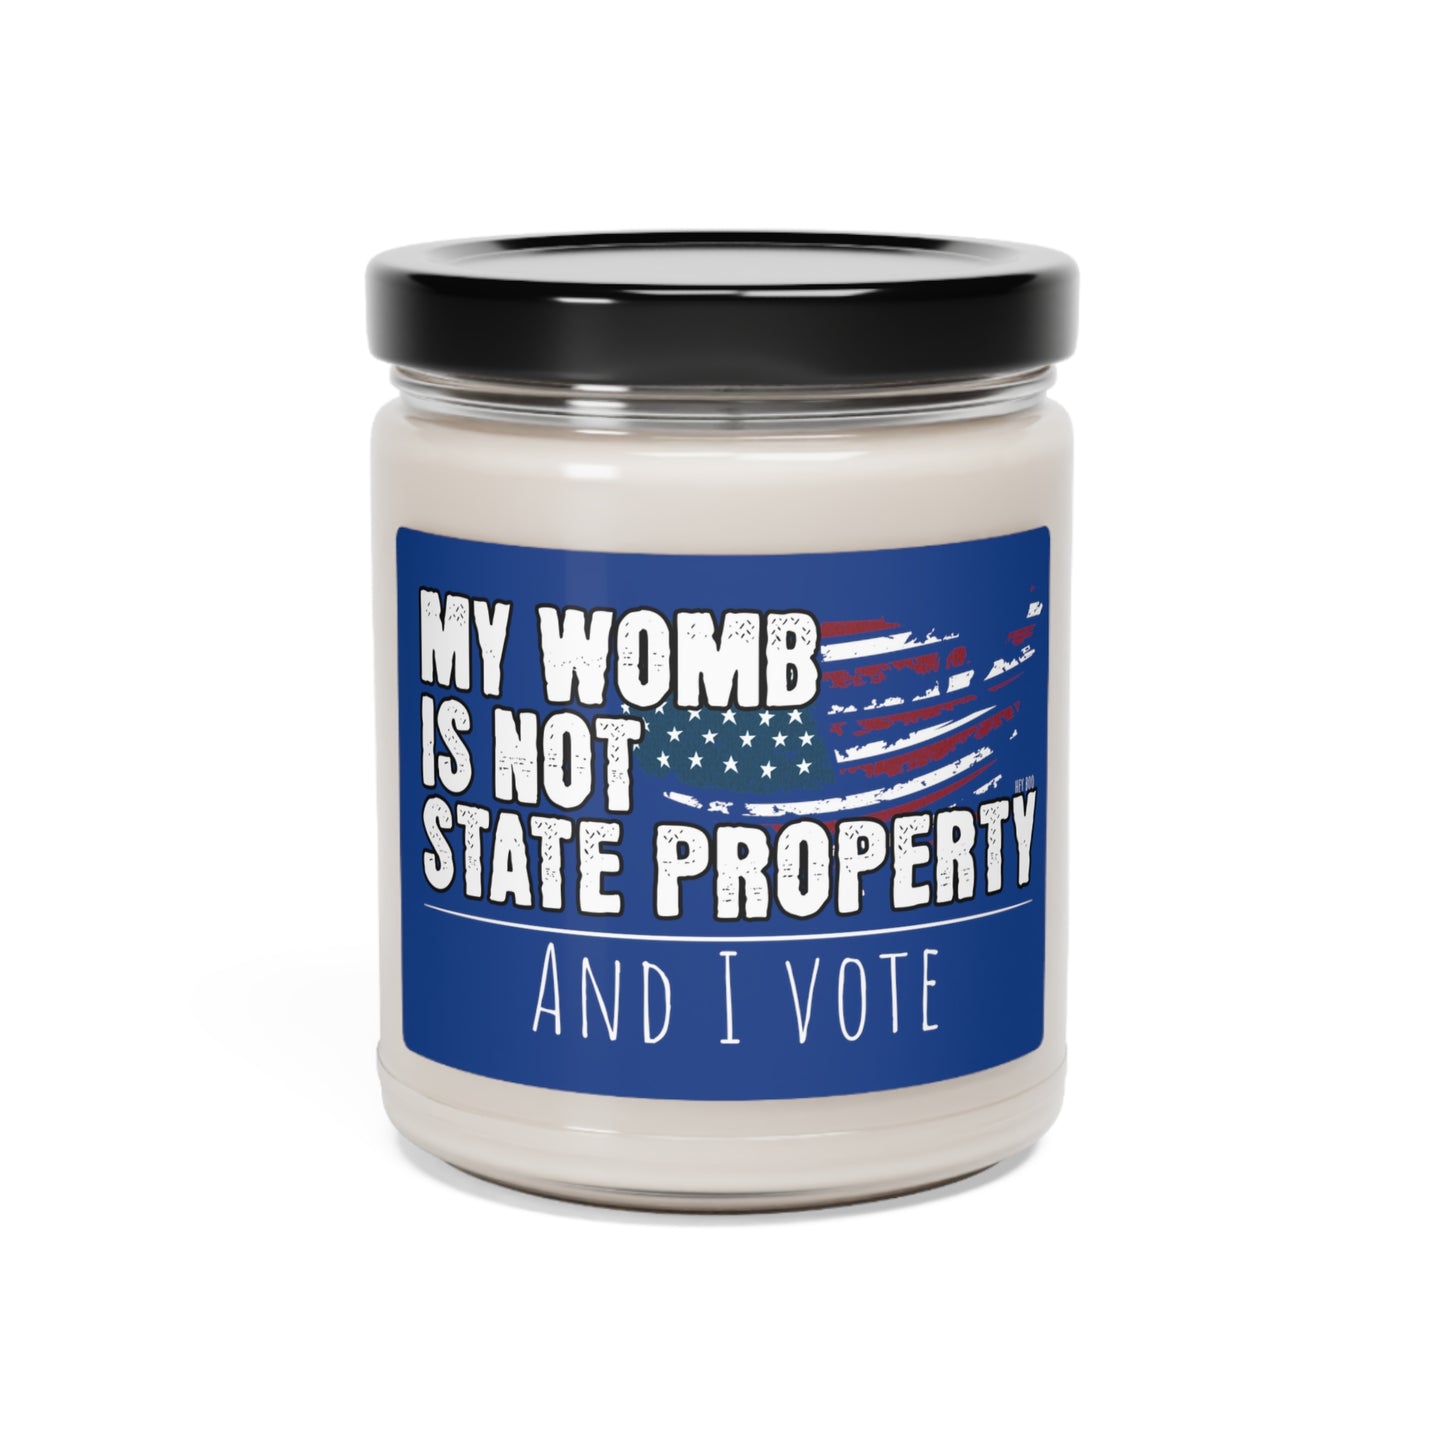 Pro Roe v Wade scented candle, perfect party favor or a unique item in gift baskets